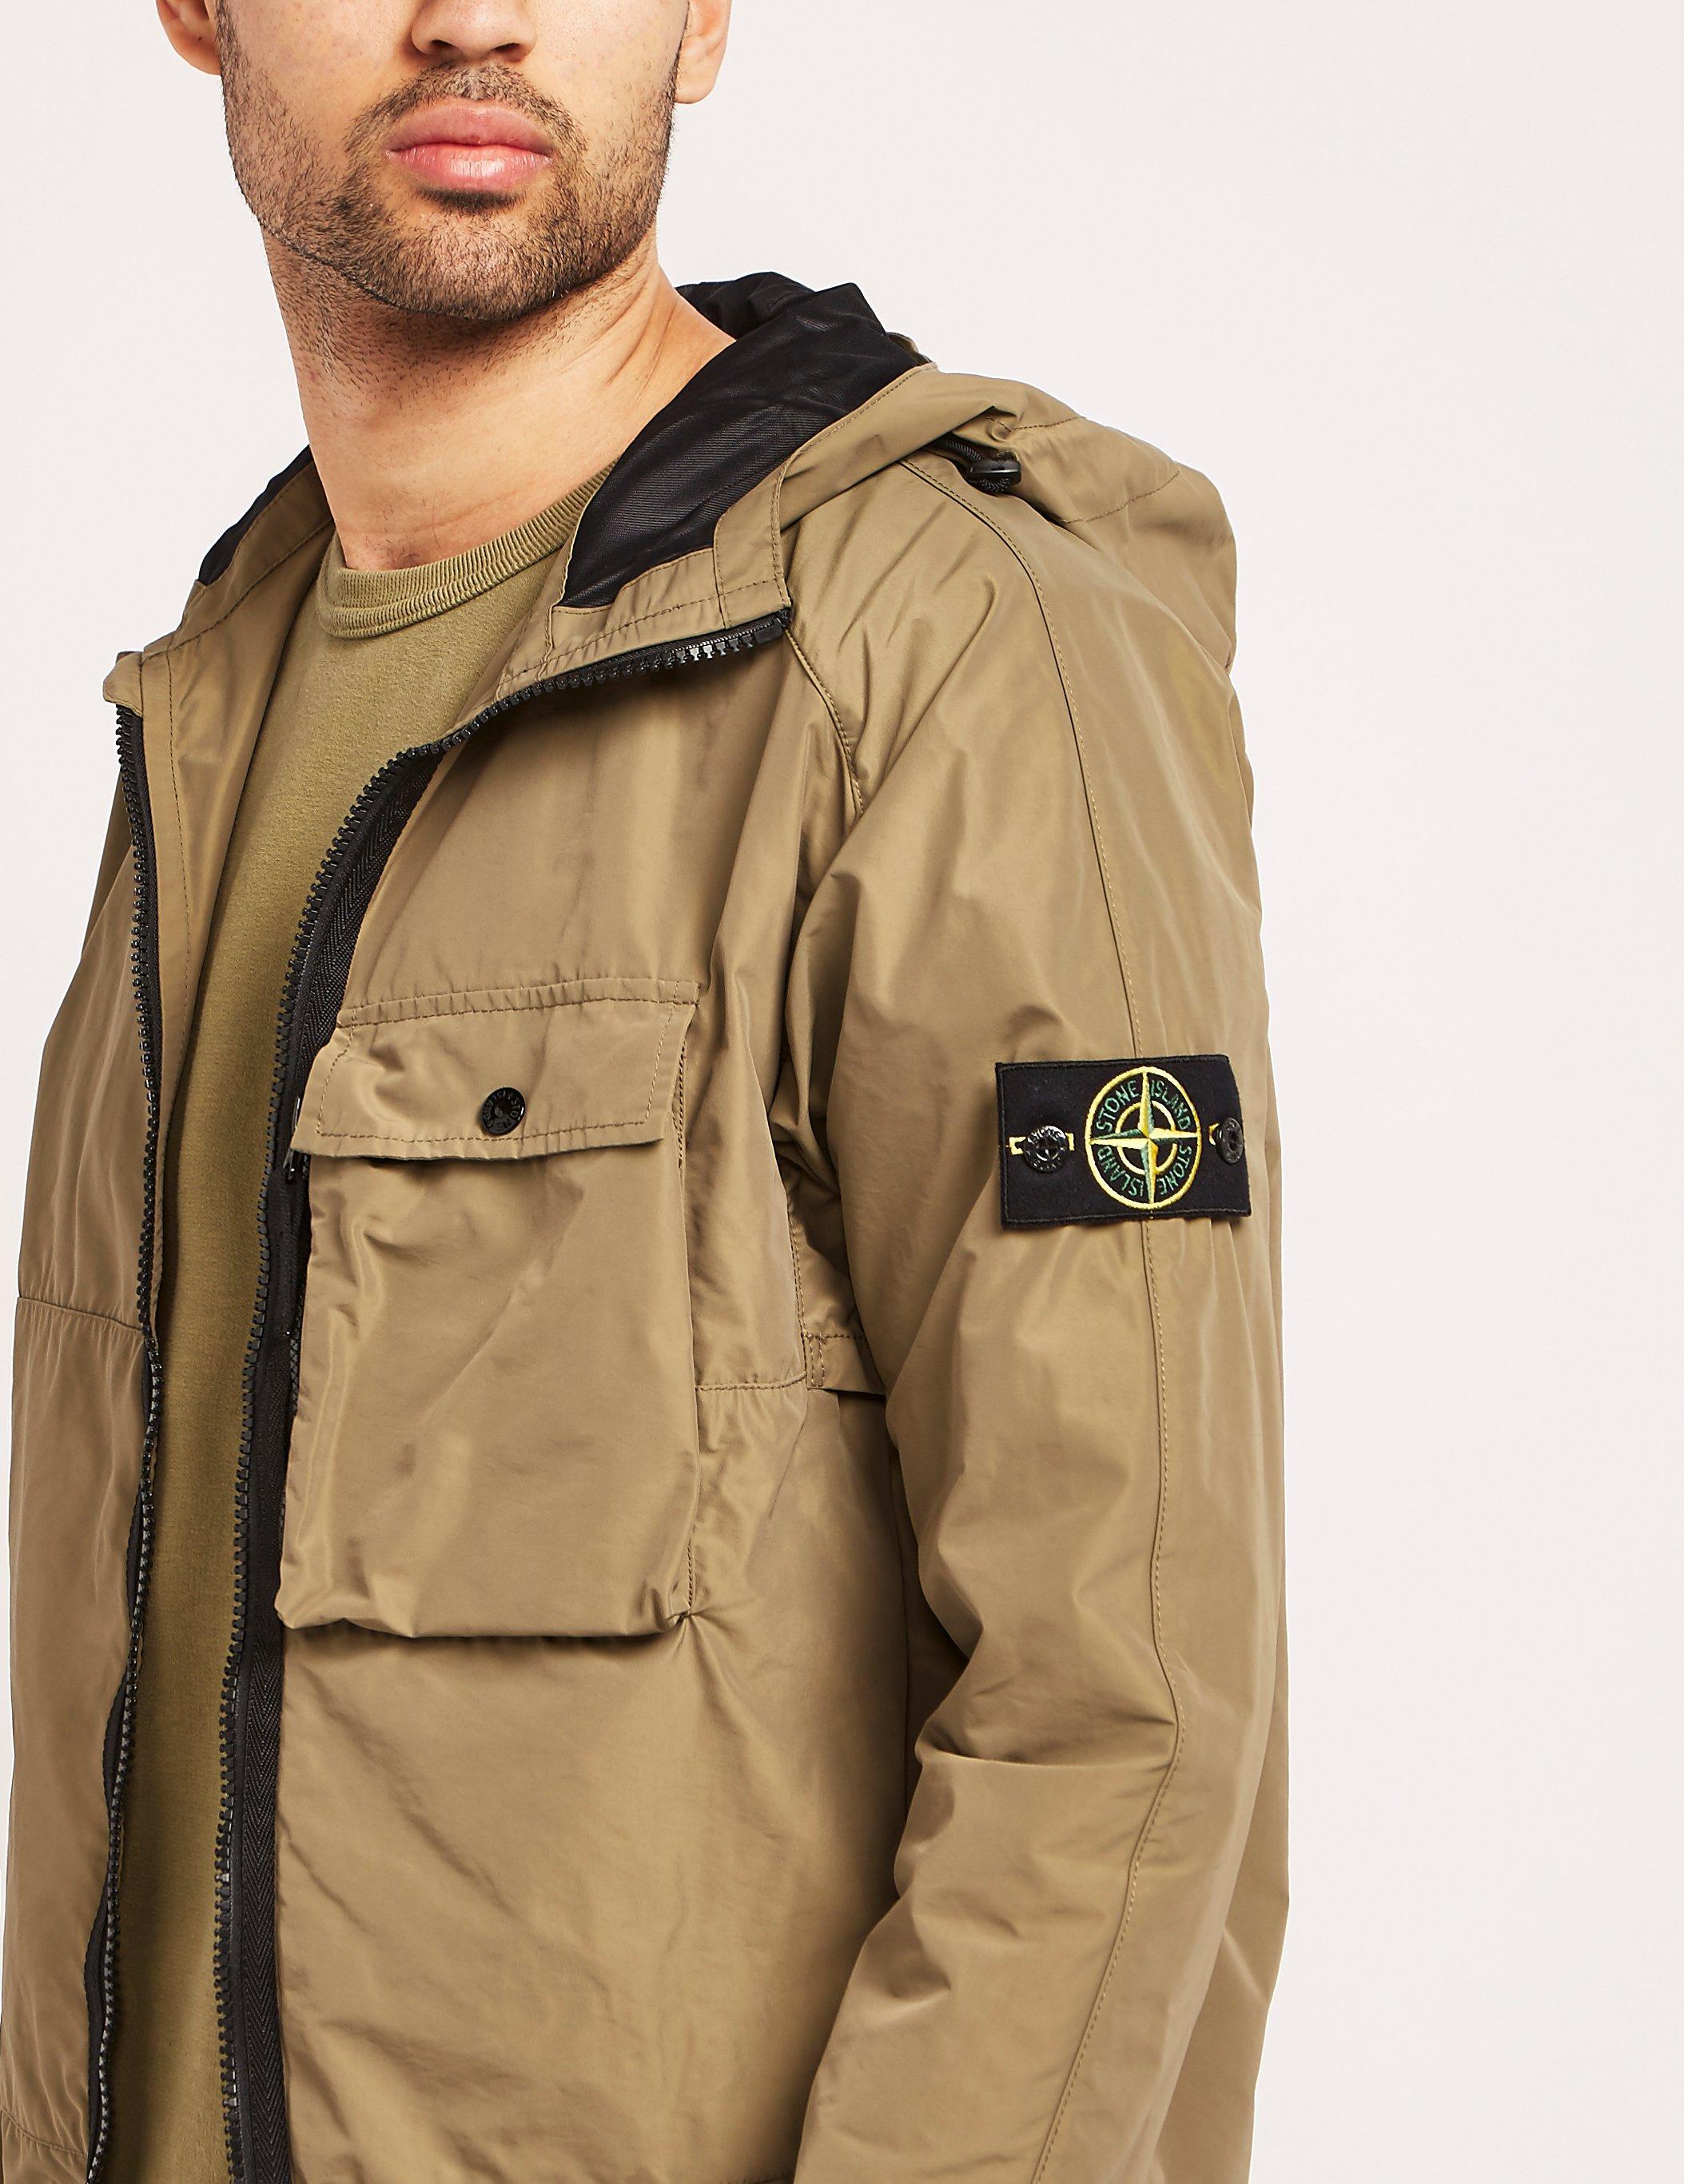 Stone Island Synthetic Micro Reps Hooded Jacket in Khaki (Natural 